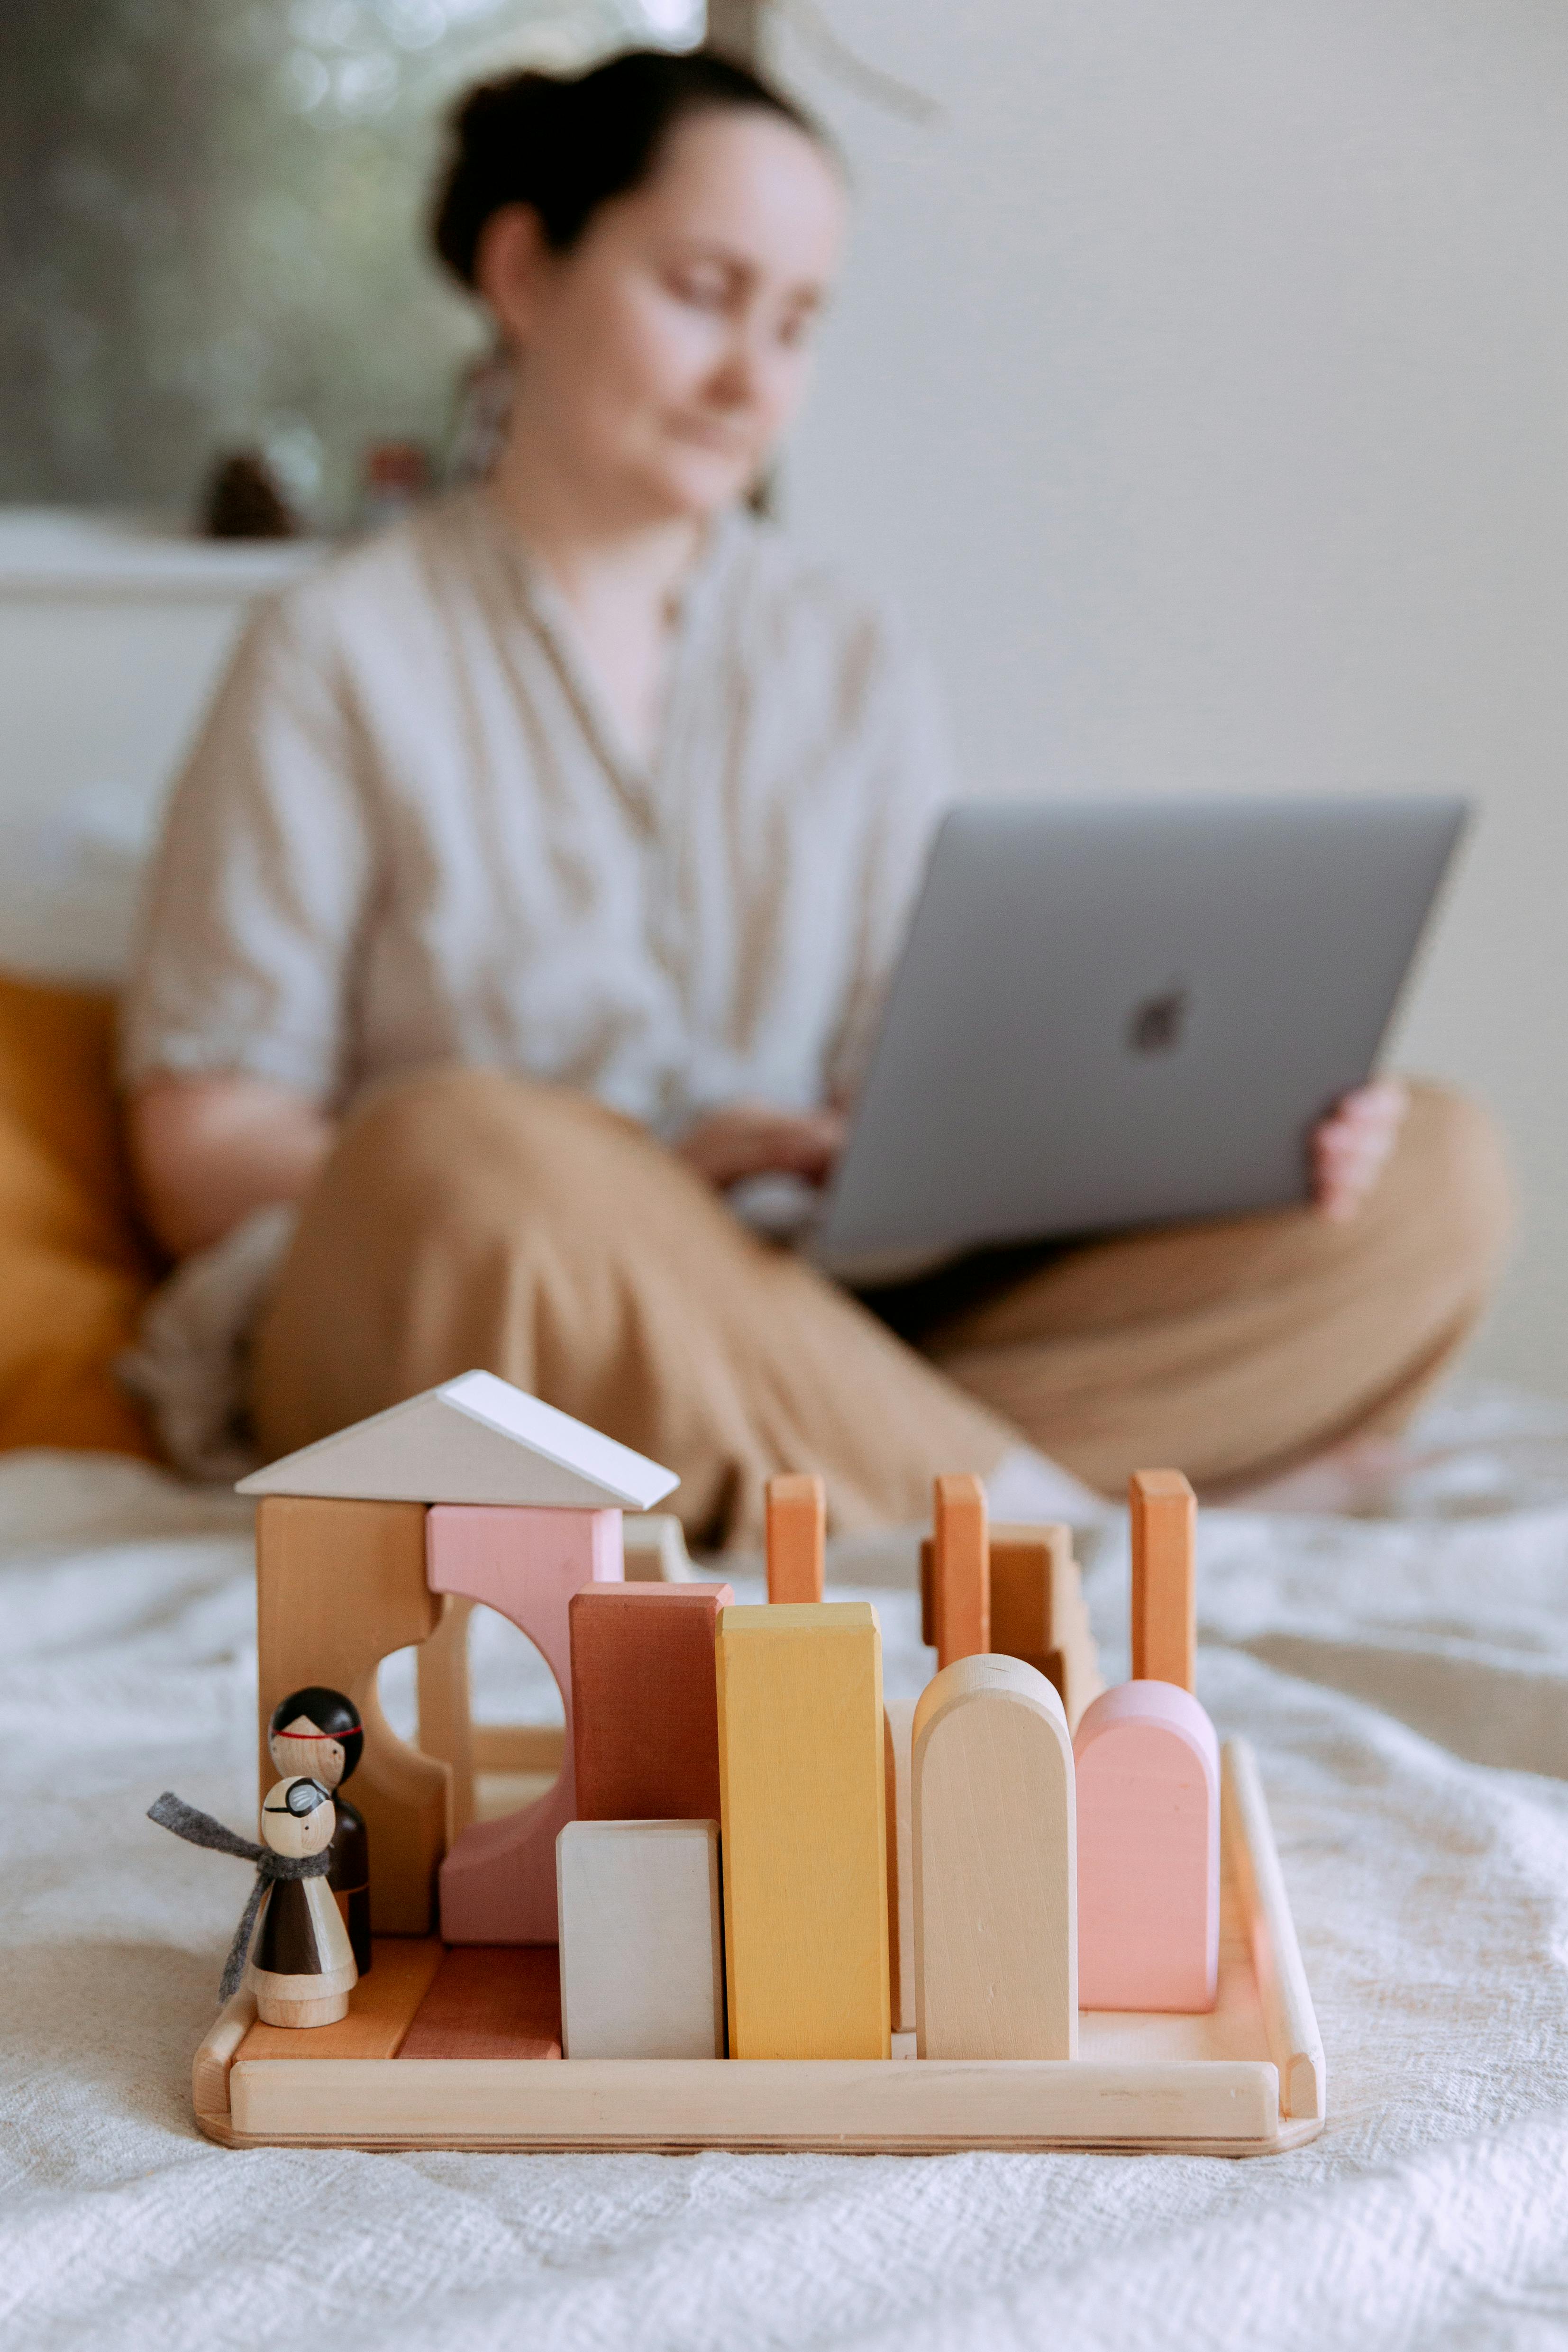 wooden blocks and toys standing on bed and focused woman with laptop on background